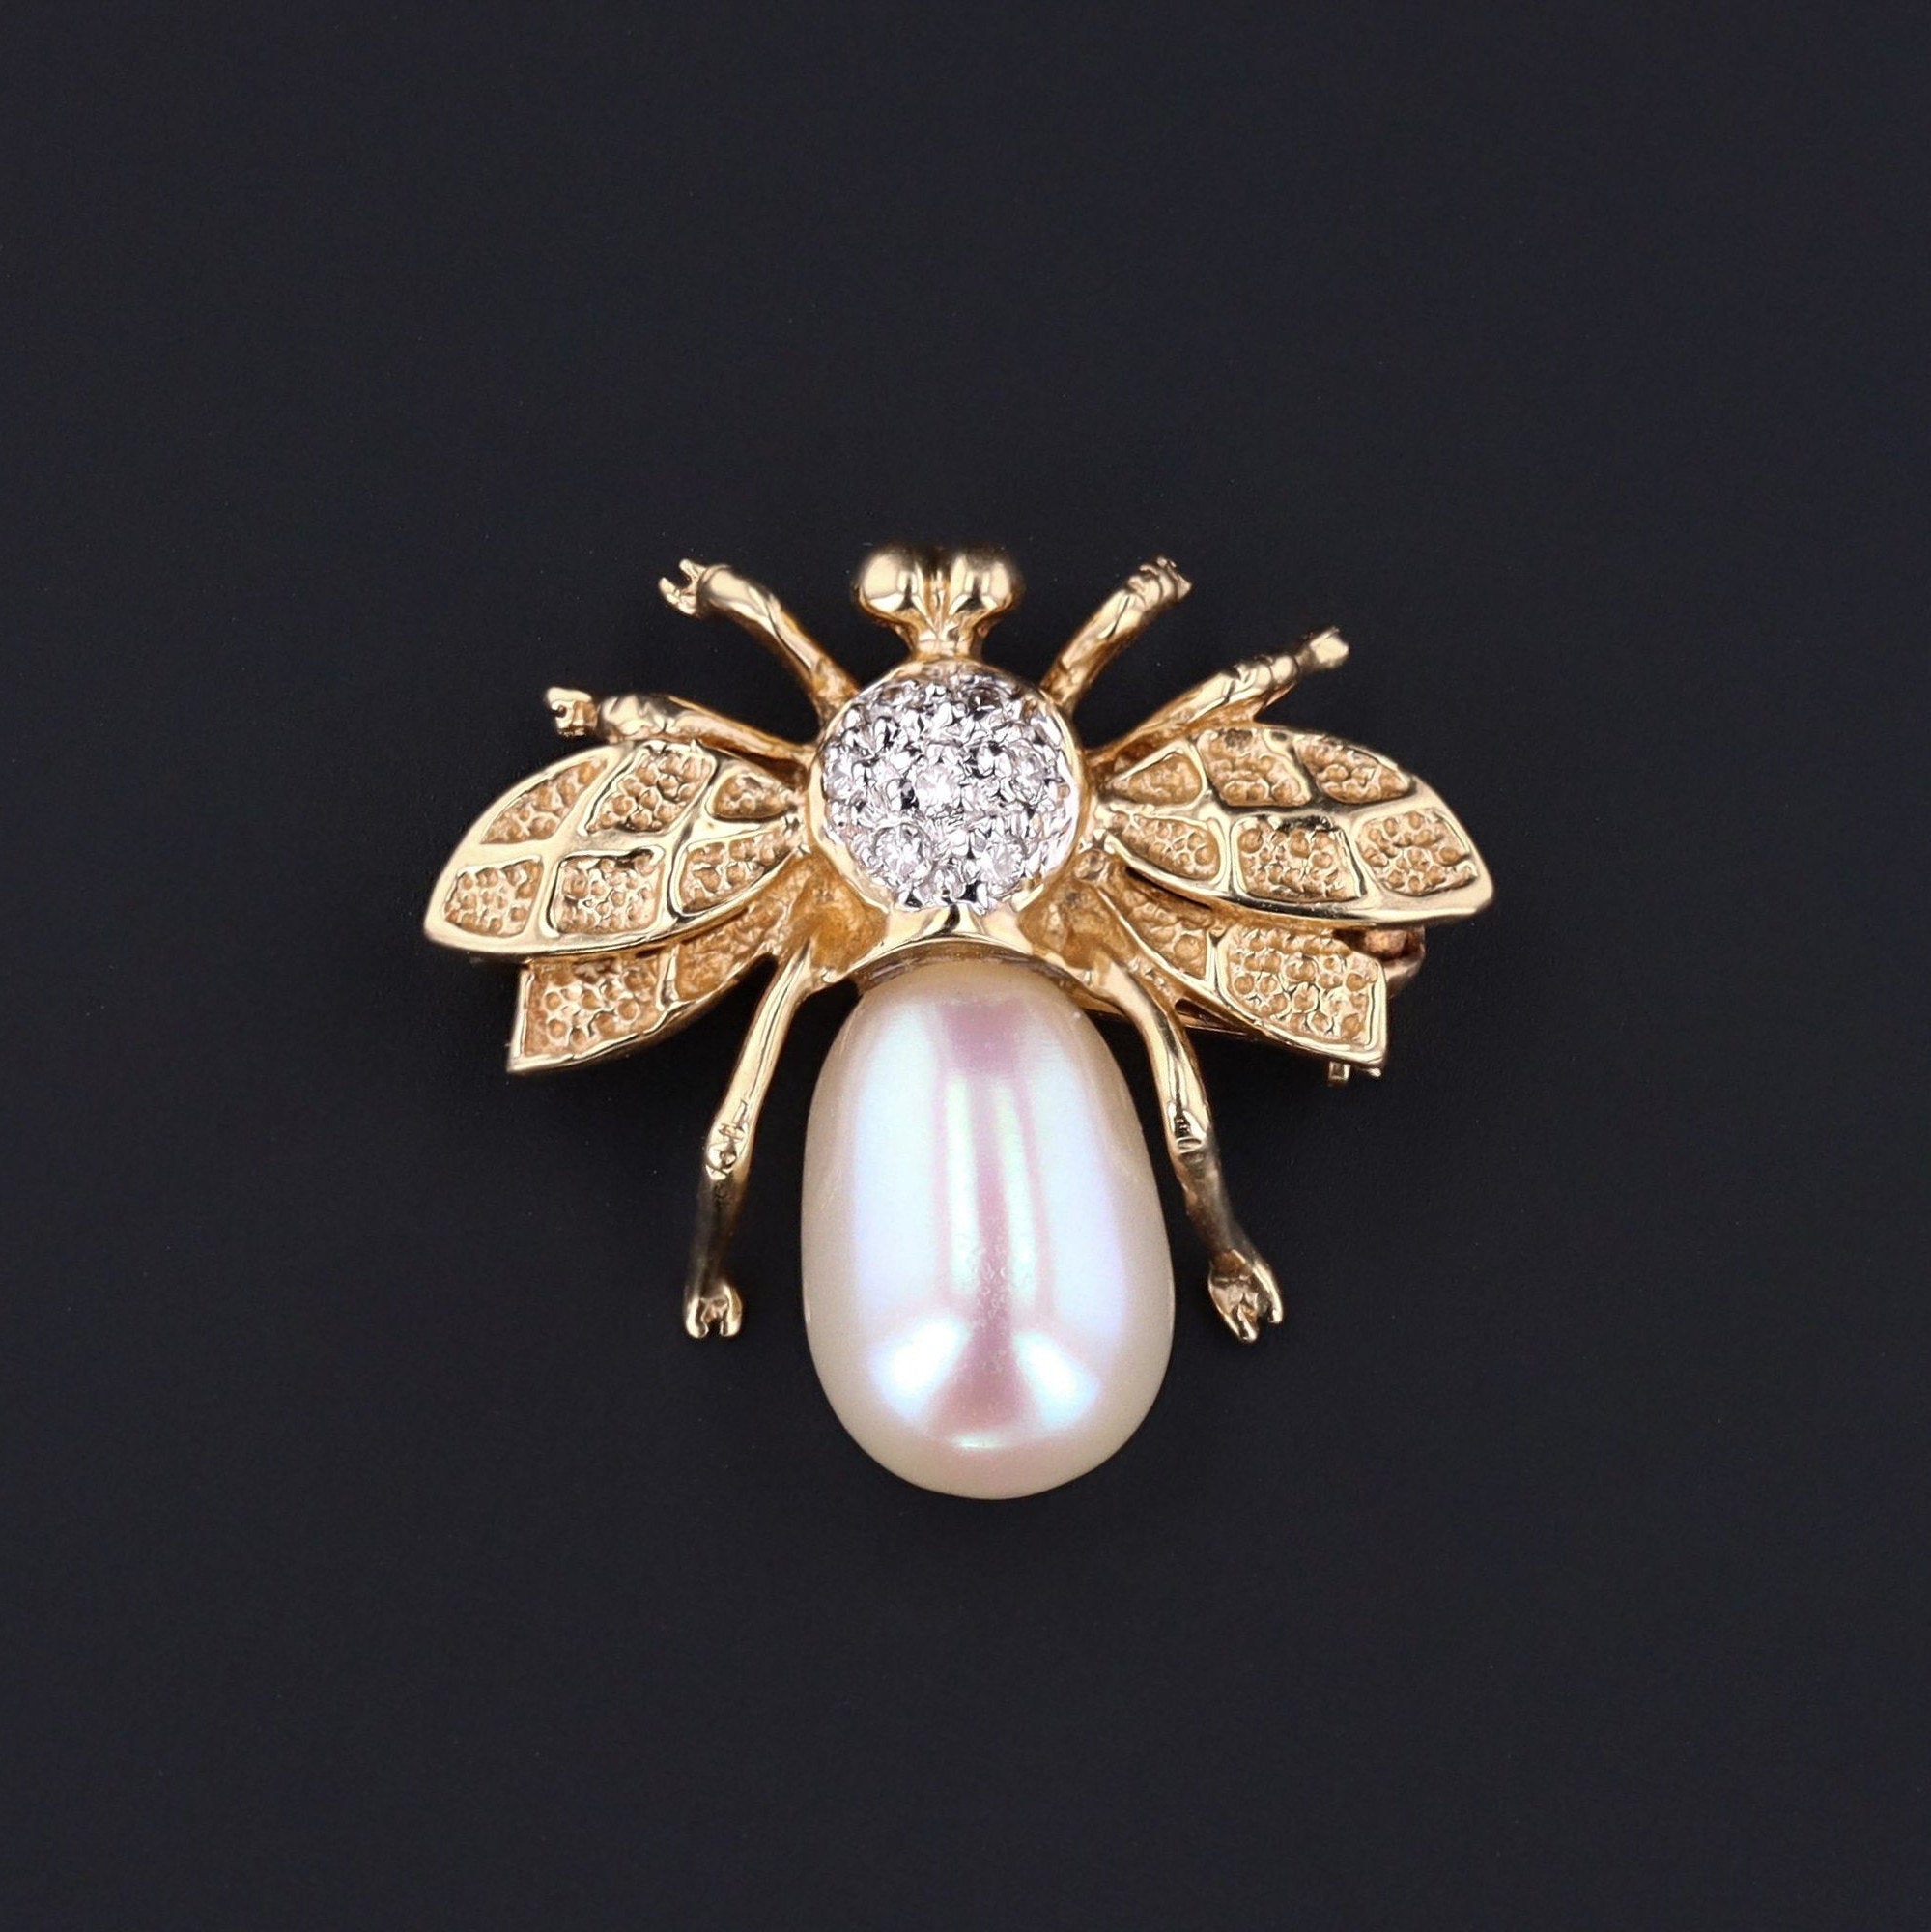 Vintage Insect Pendant or Brooch | Pearl and Diamond Bug Brooch | 14k Gold Bug Pendant | 14k Gold Pendant